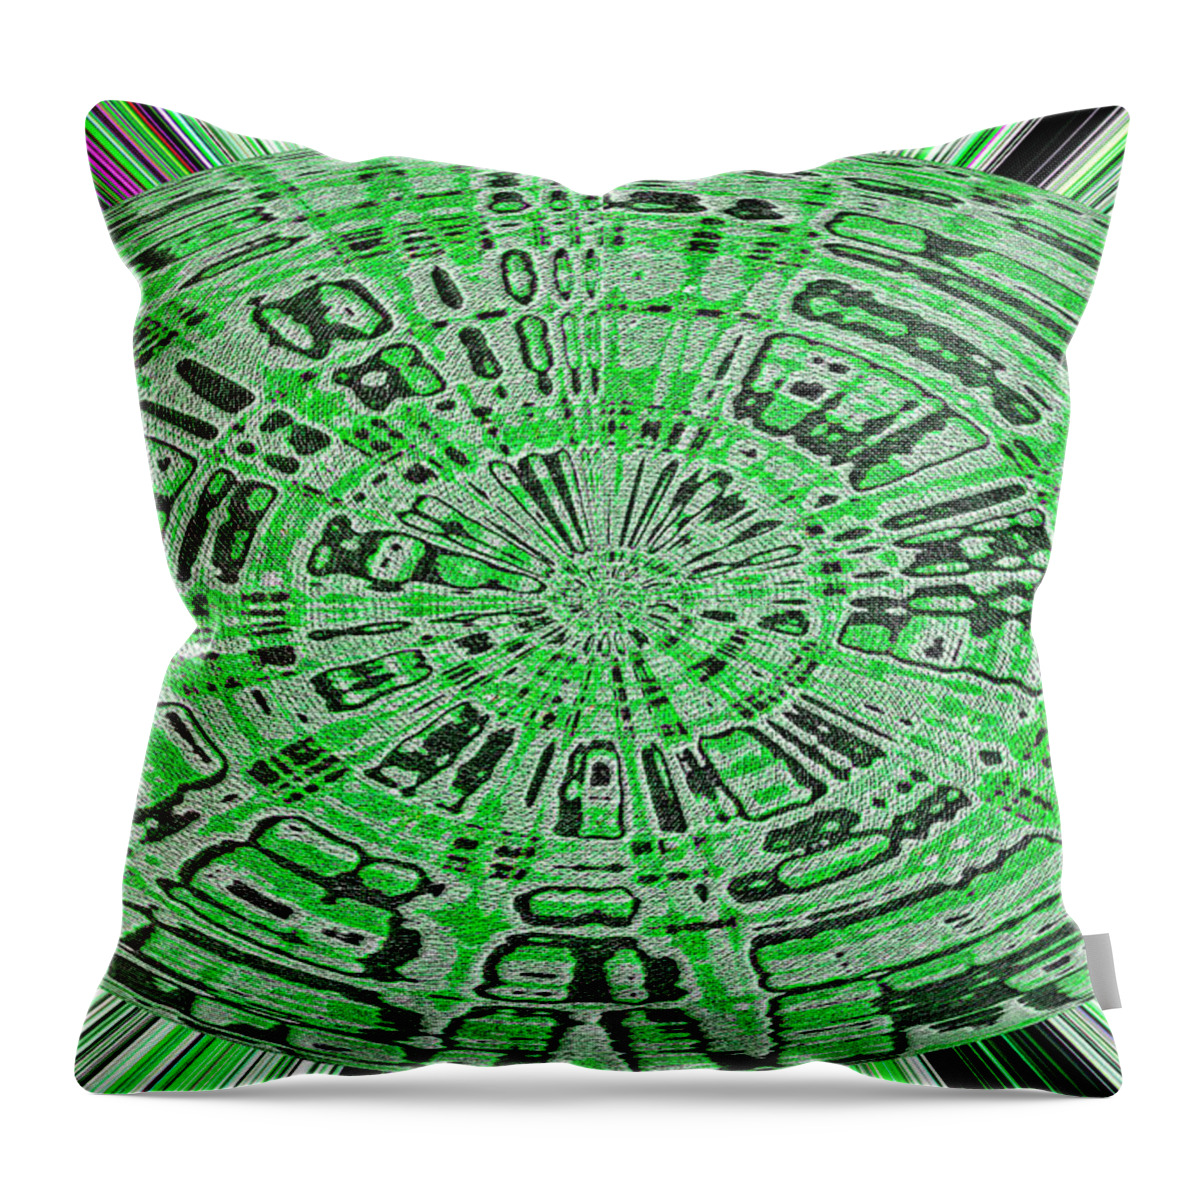 Palm Tree Fruit Abstract #5321 2 P Throw Pillow featuring the digital art Palm Tree Fruit Abstract #5321 2 p by Tom Janca